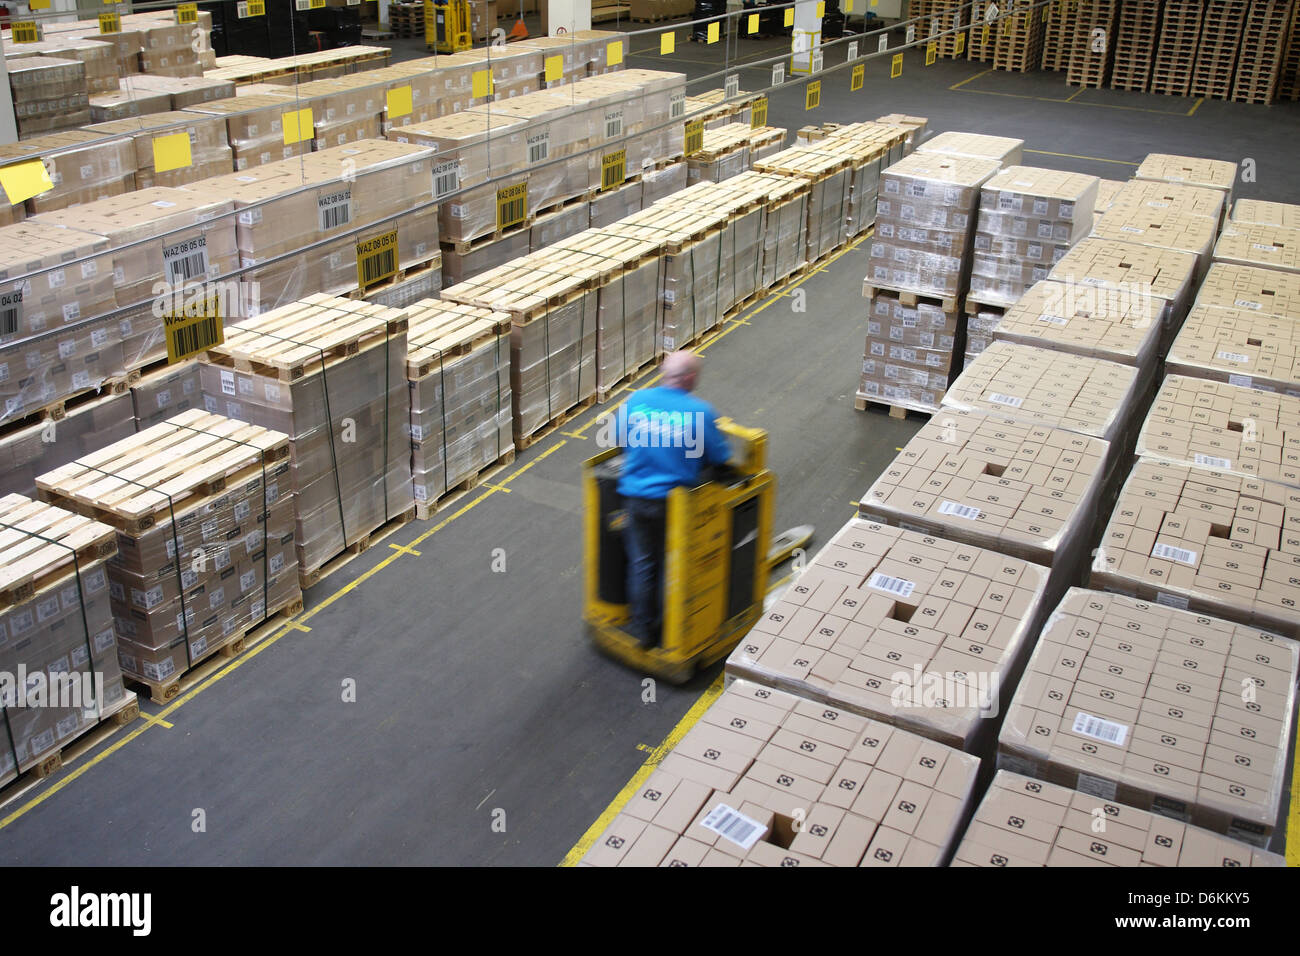 Berlin, Germany, workers in the Dock 100 Logistik GmbH at the logistics center of Dock 100 Stock Photo